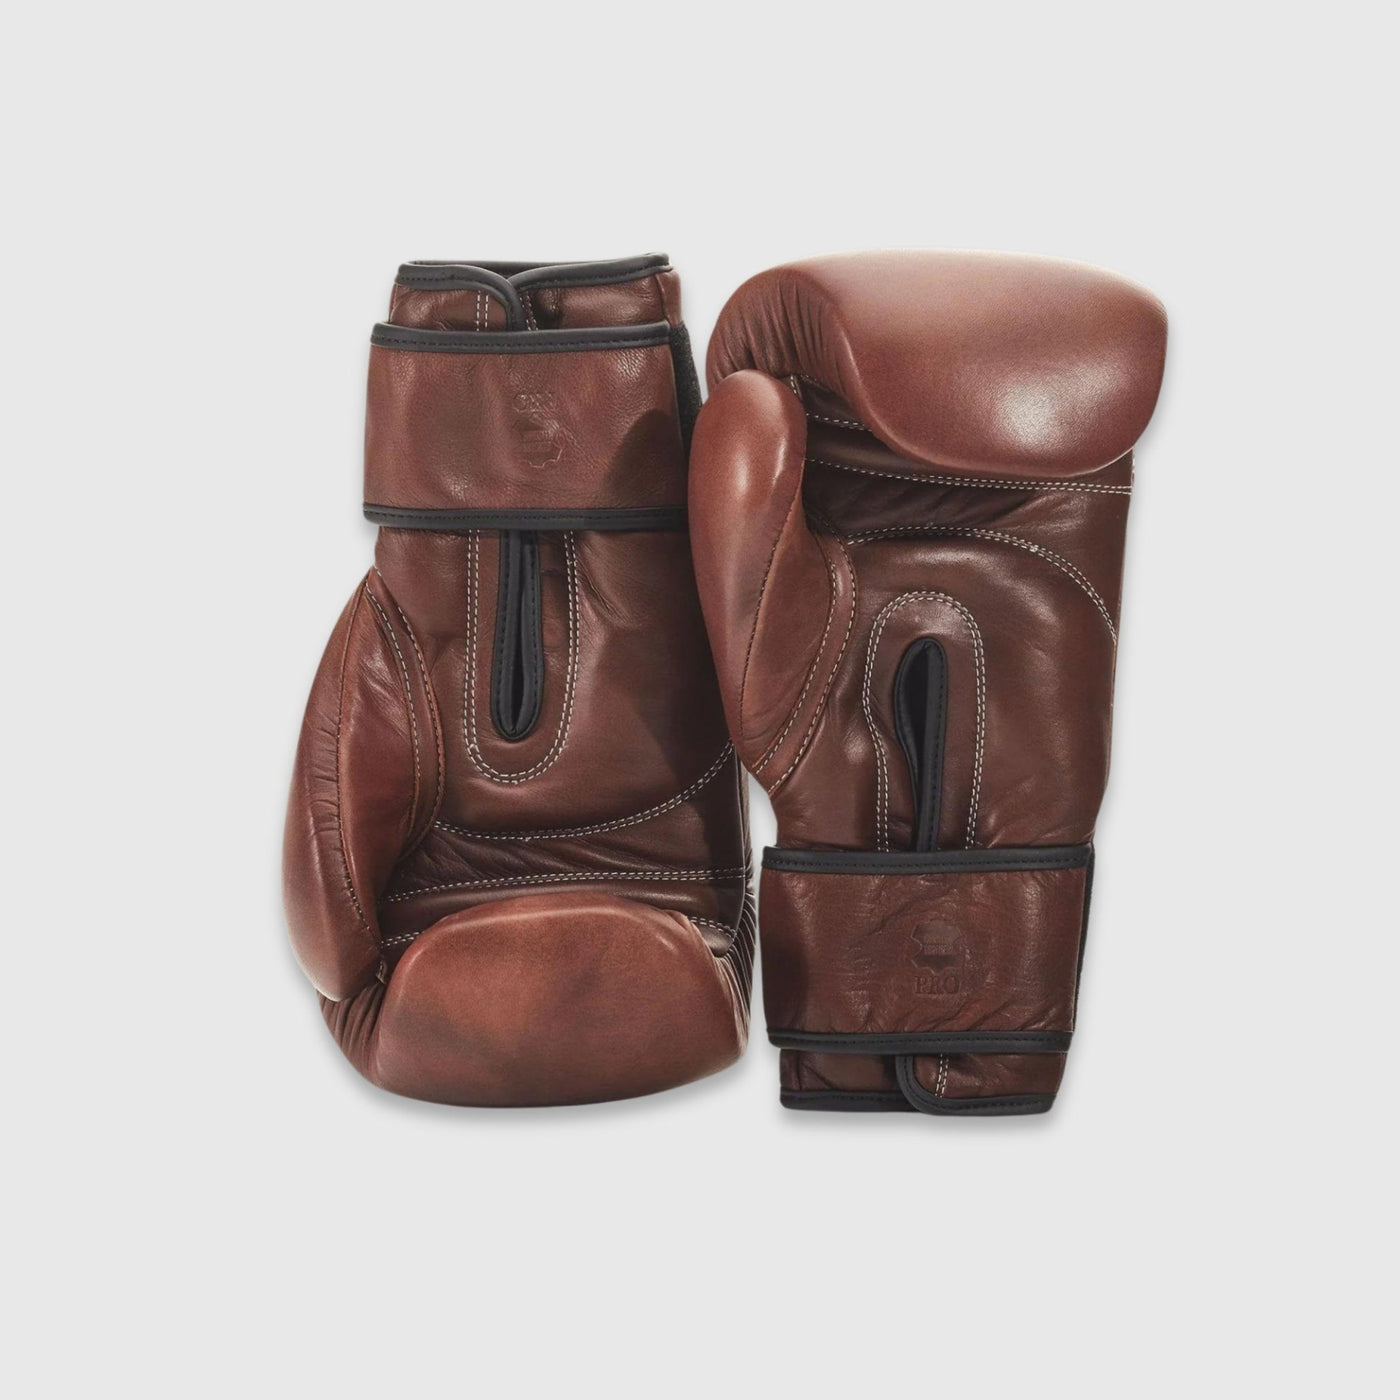 PRO Heritage Brown Leather Boxing Package (Strap Up) - MODEST VINTAGE PLAYER LTD